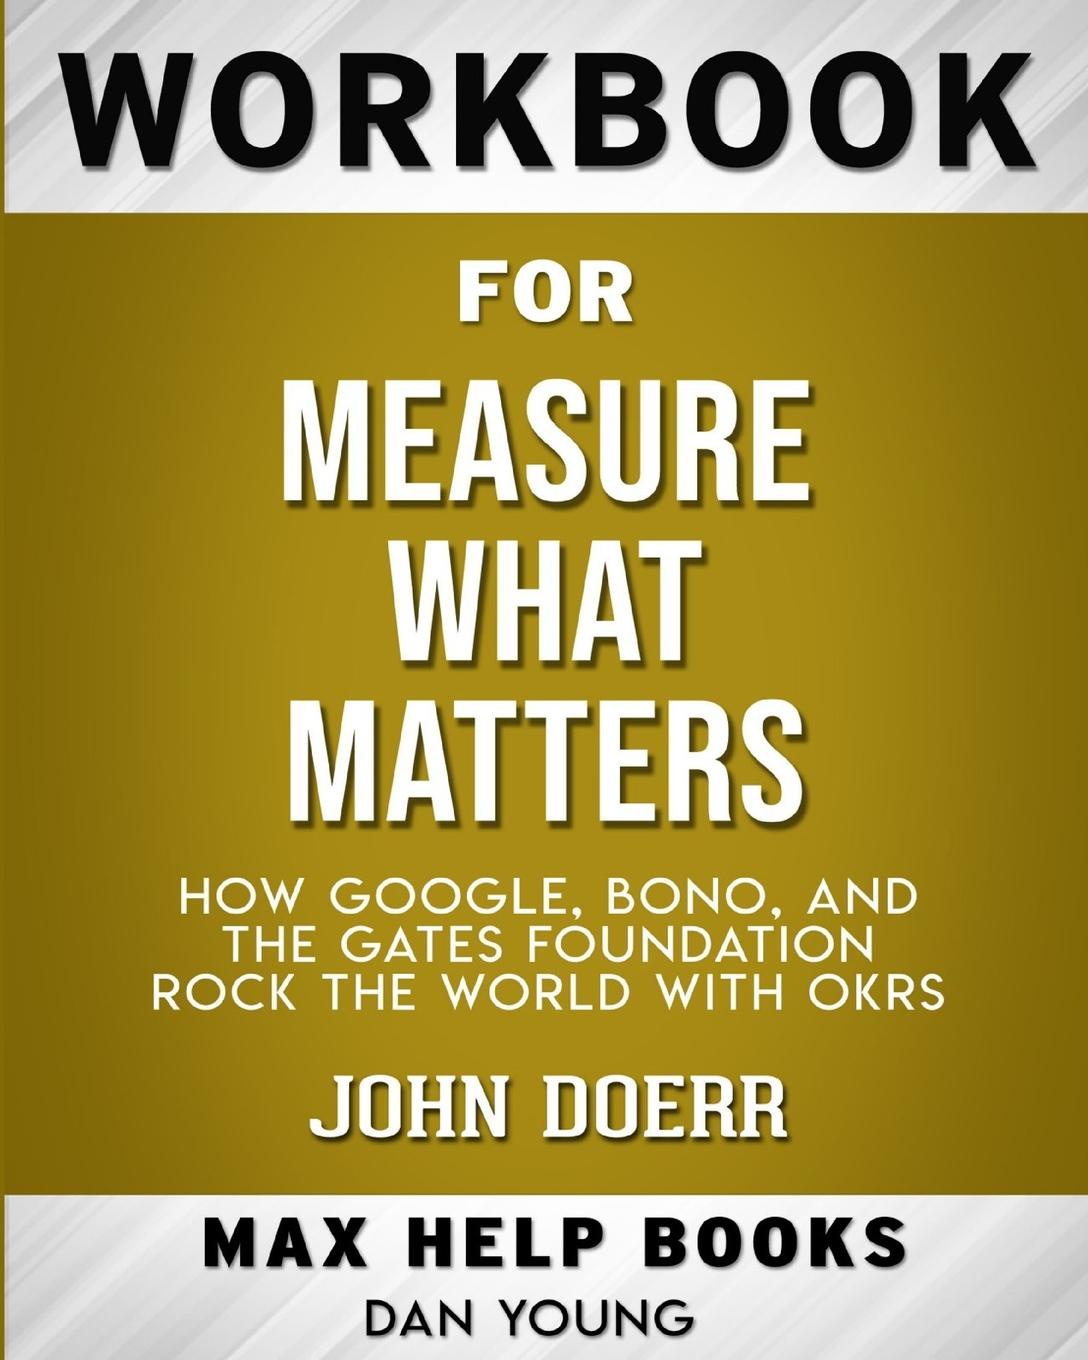 Workbook for Measure What Matters. How Google, Bono, and the Gates Foundation Rock the World with OKRs (Max-Help Books)